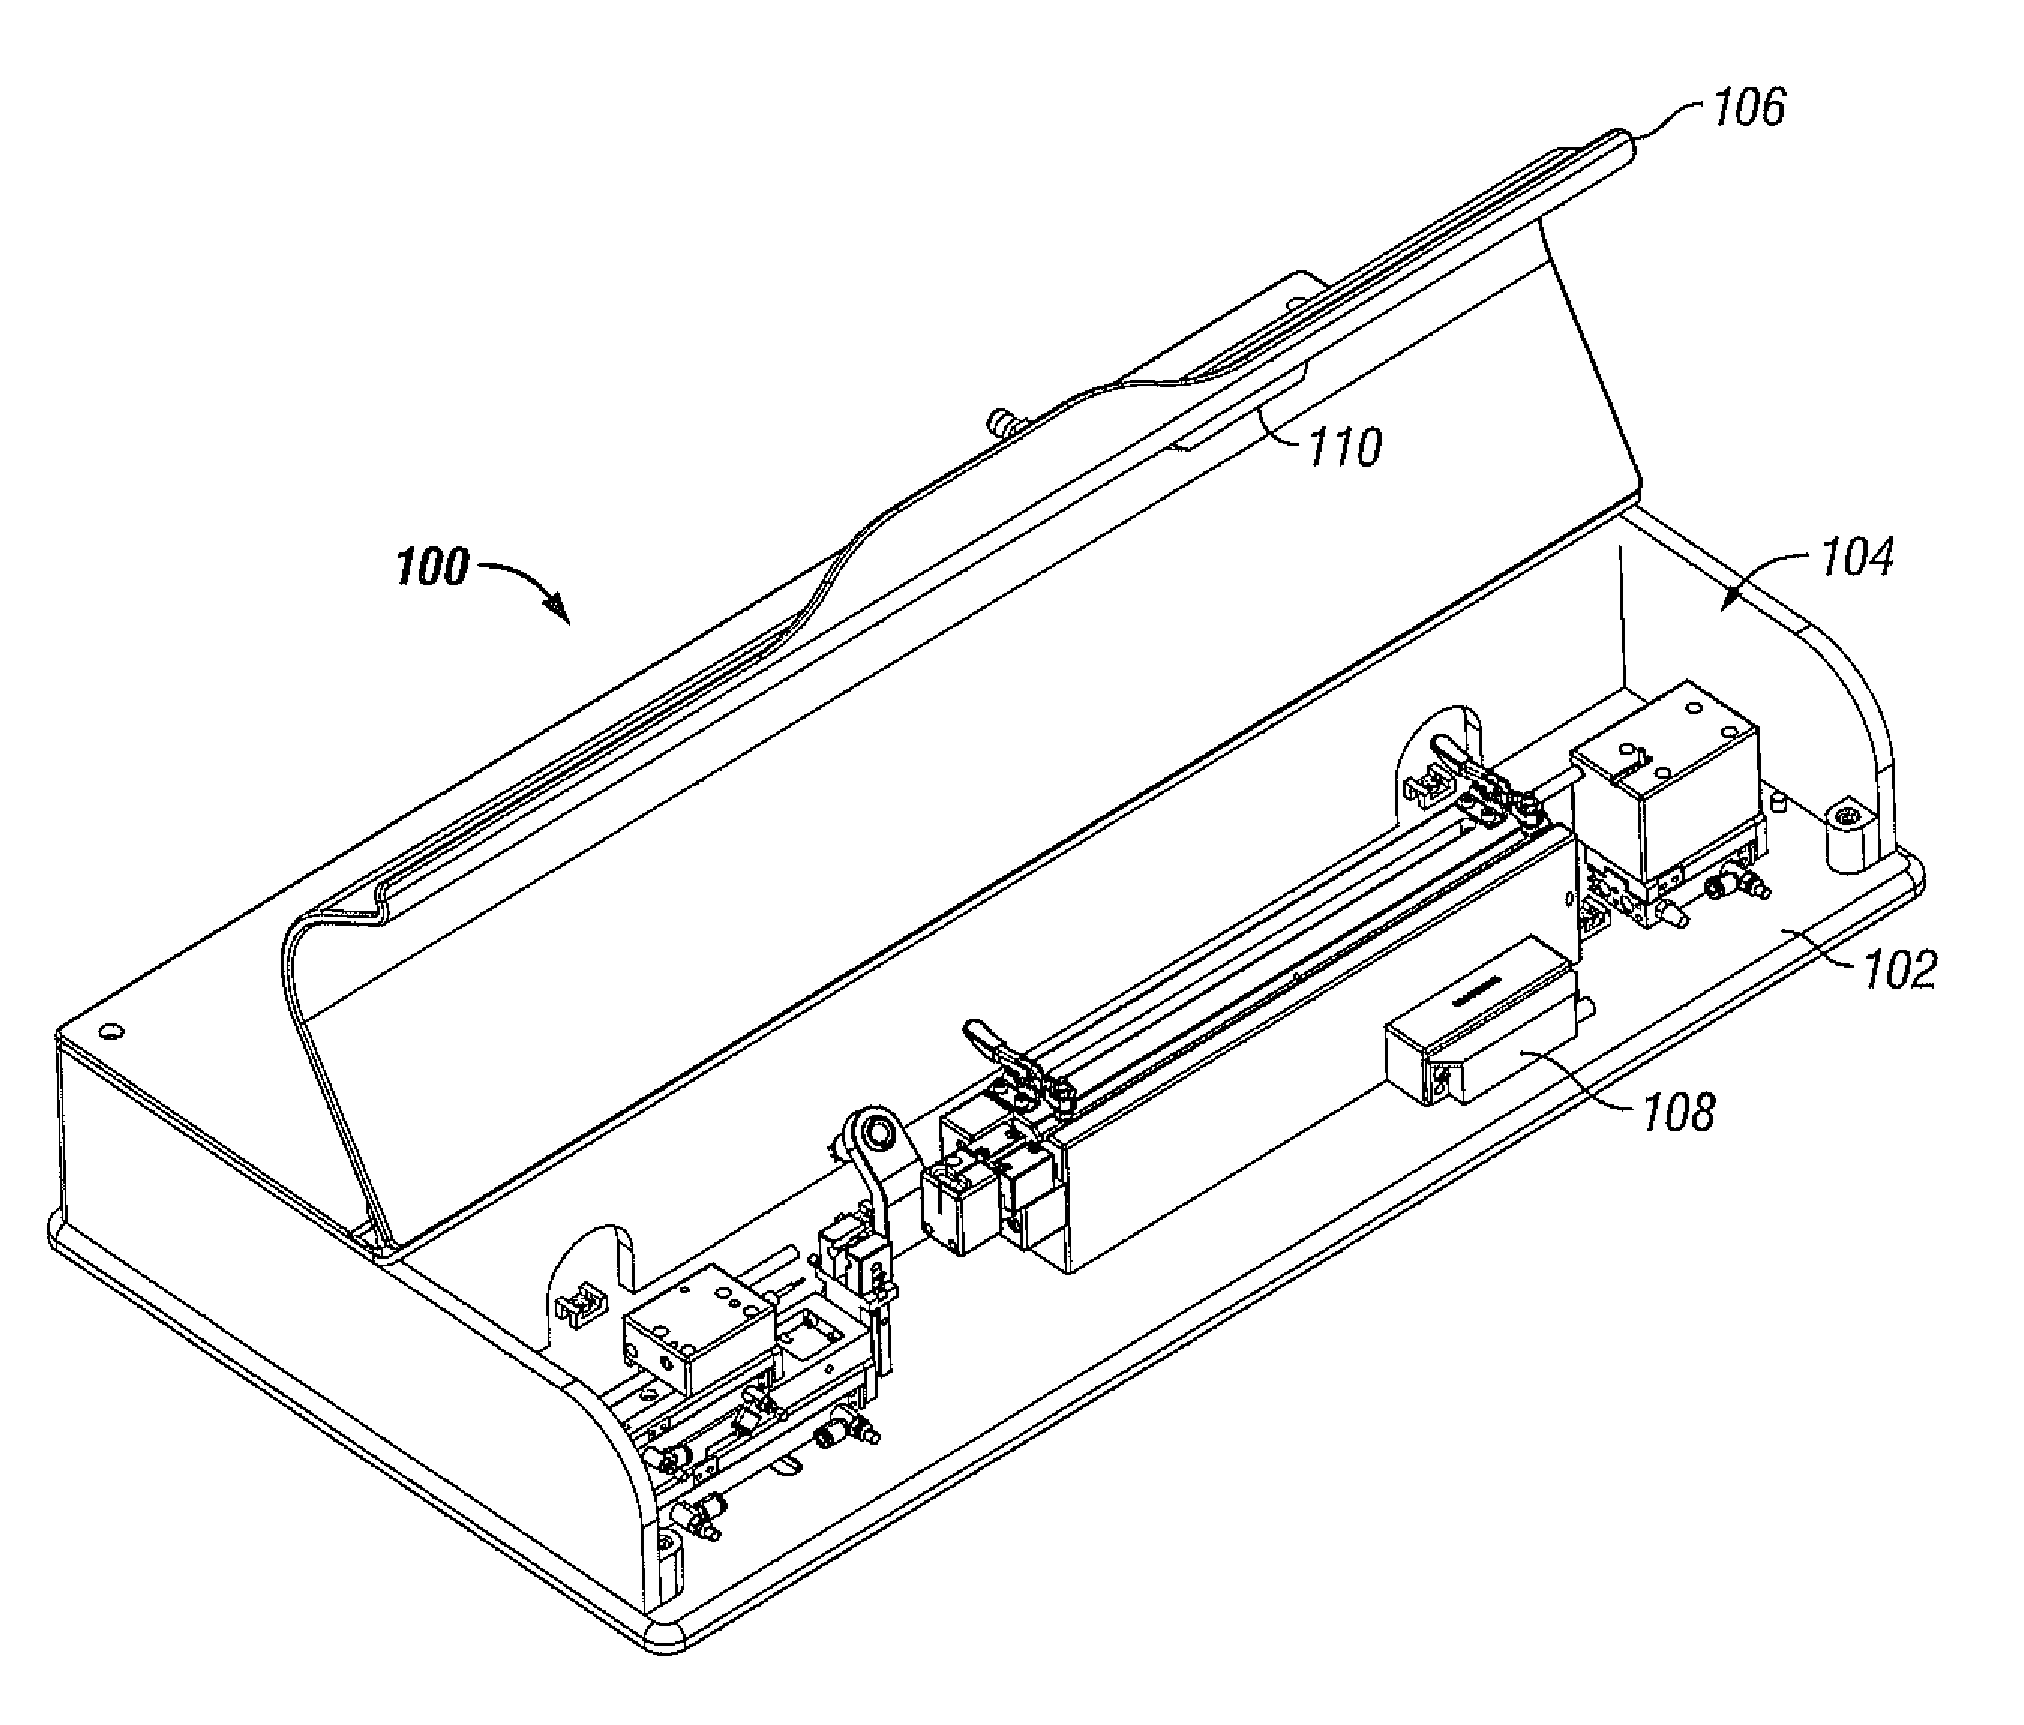 Automated assembly device to tolerate blade variation